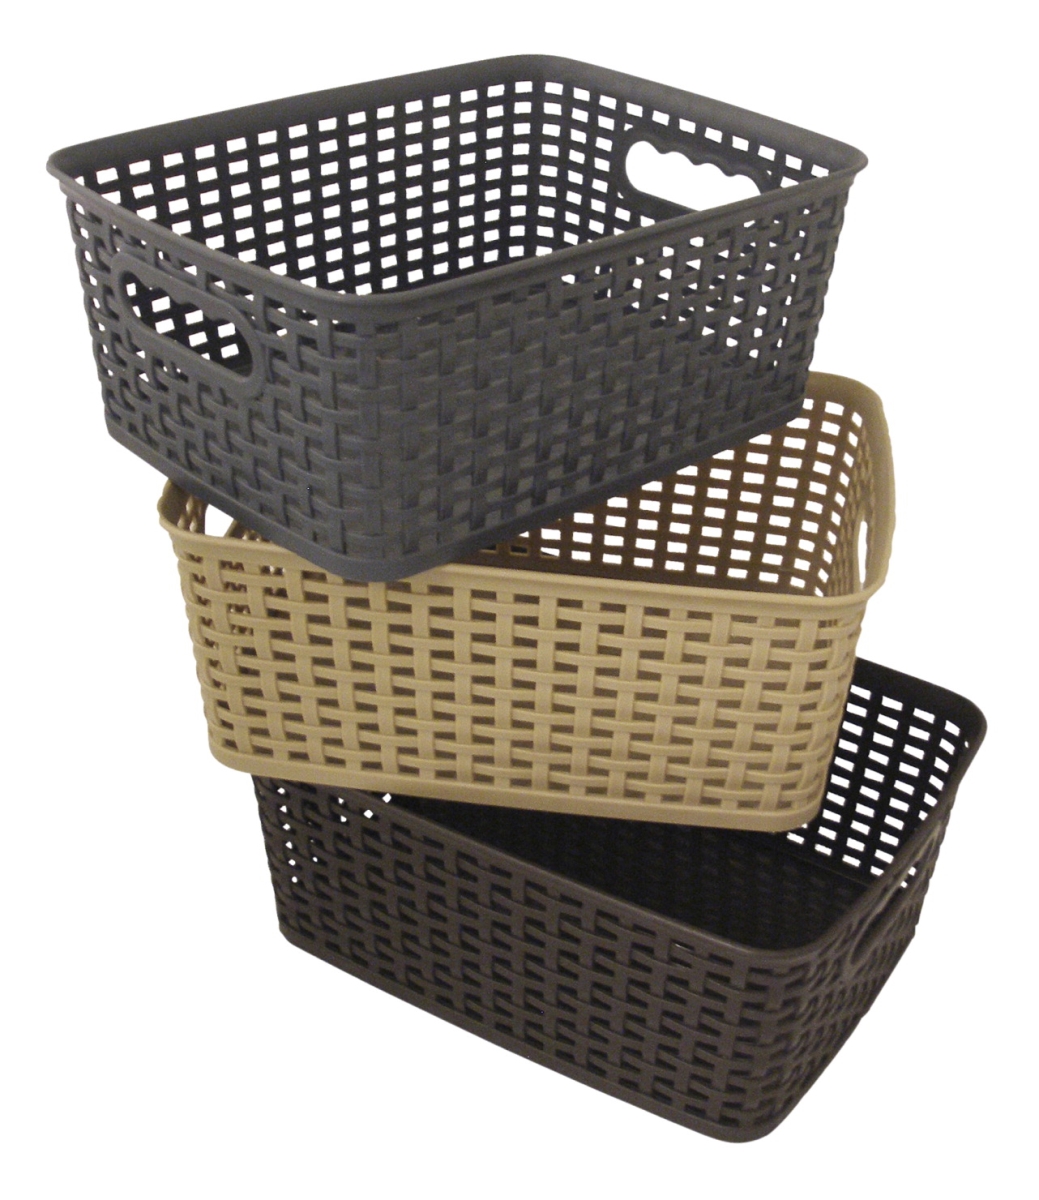 2006378 10 X 7.5 X 4 In. Weave Basket, Assorted Color - Small